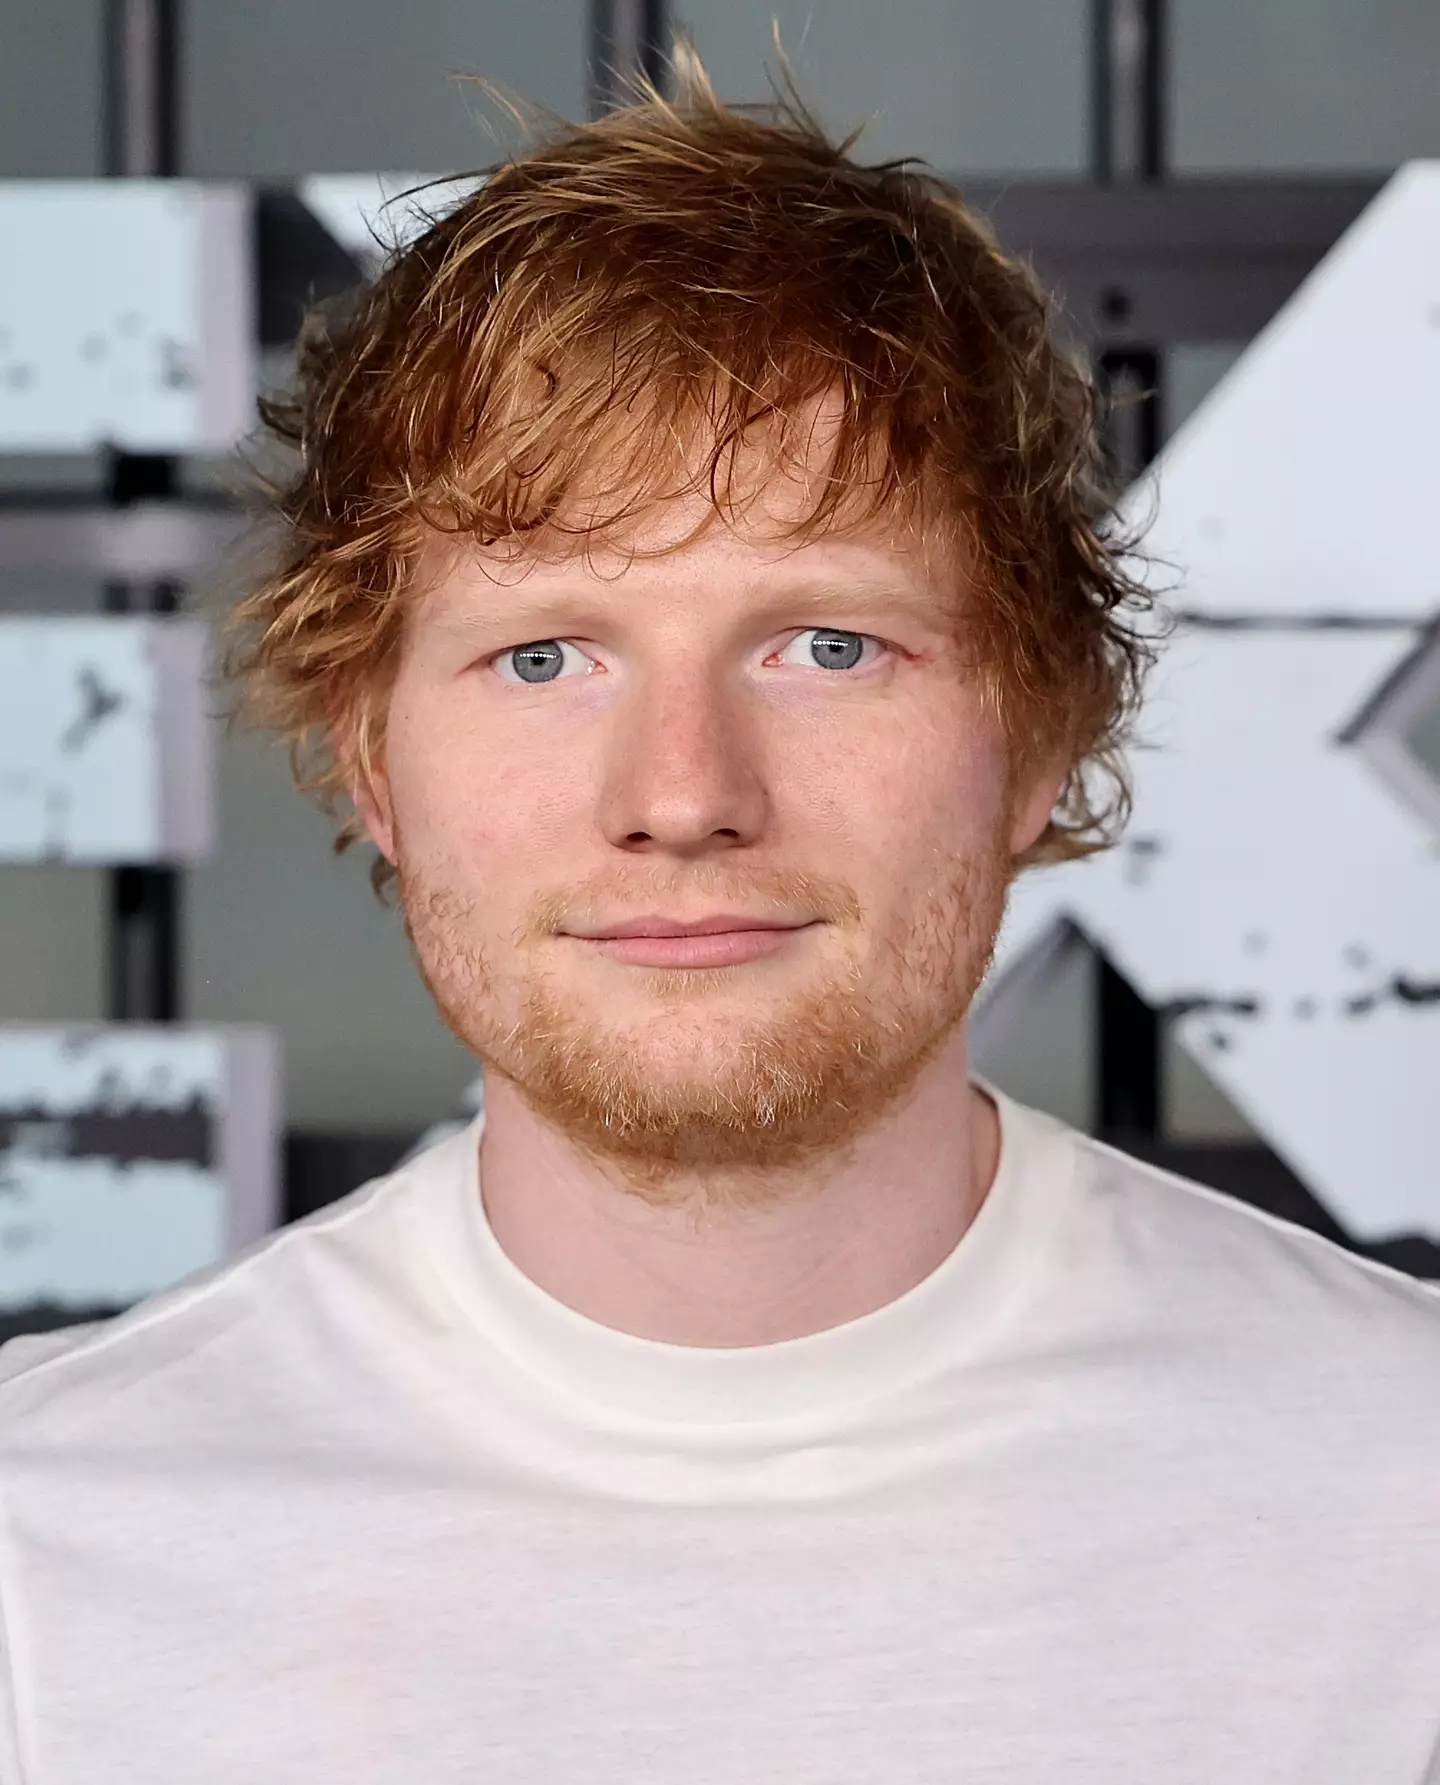 Even Ed Sheeran wasn't safe from the cartoon character comparison.